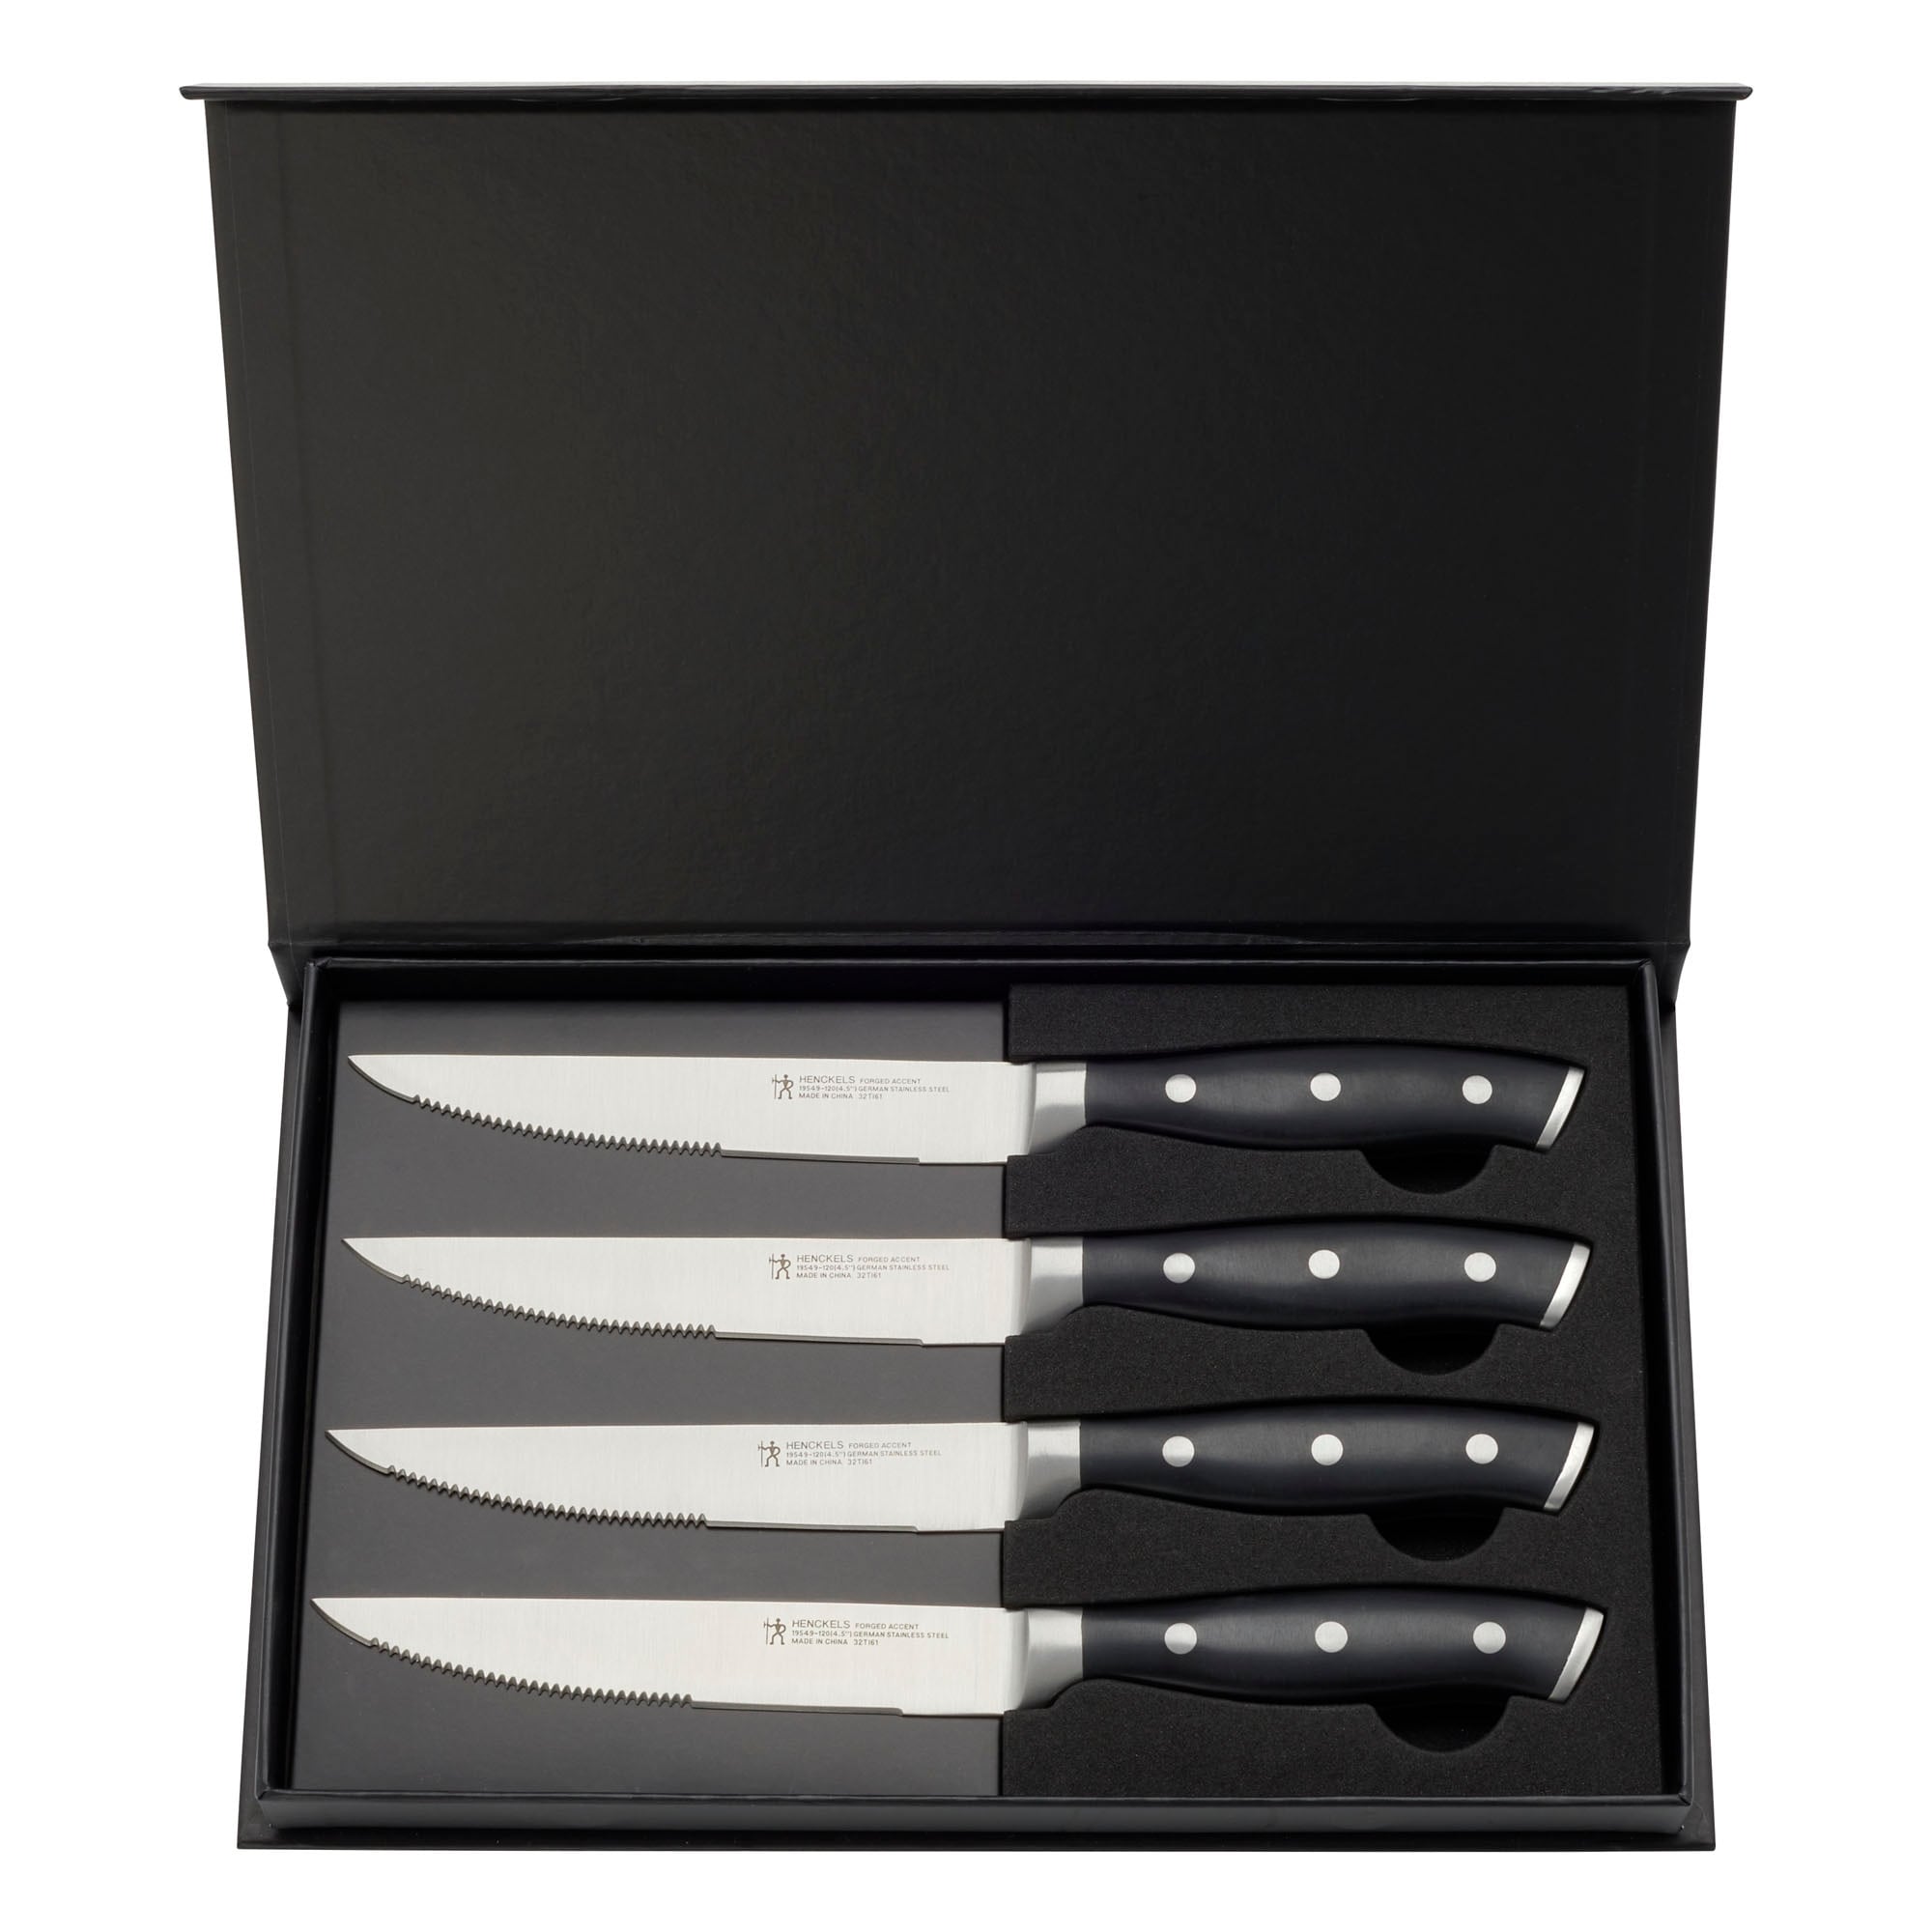 https://ak1.ostkcdn.com/images/products/is/images/direct/3c5ecec0c2678394f8952edc171a403d7348f3bc/HENCKELS-Forged-Accent-4-pc-Steak-Knife-Set.jpg